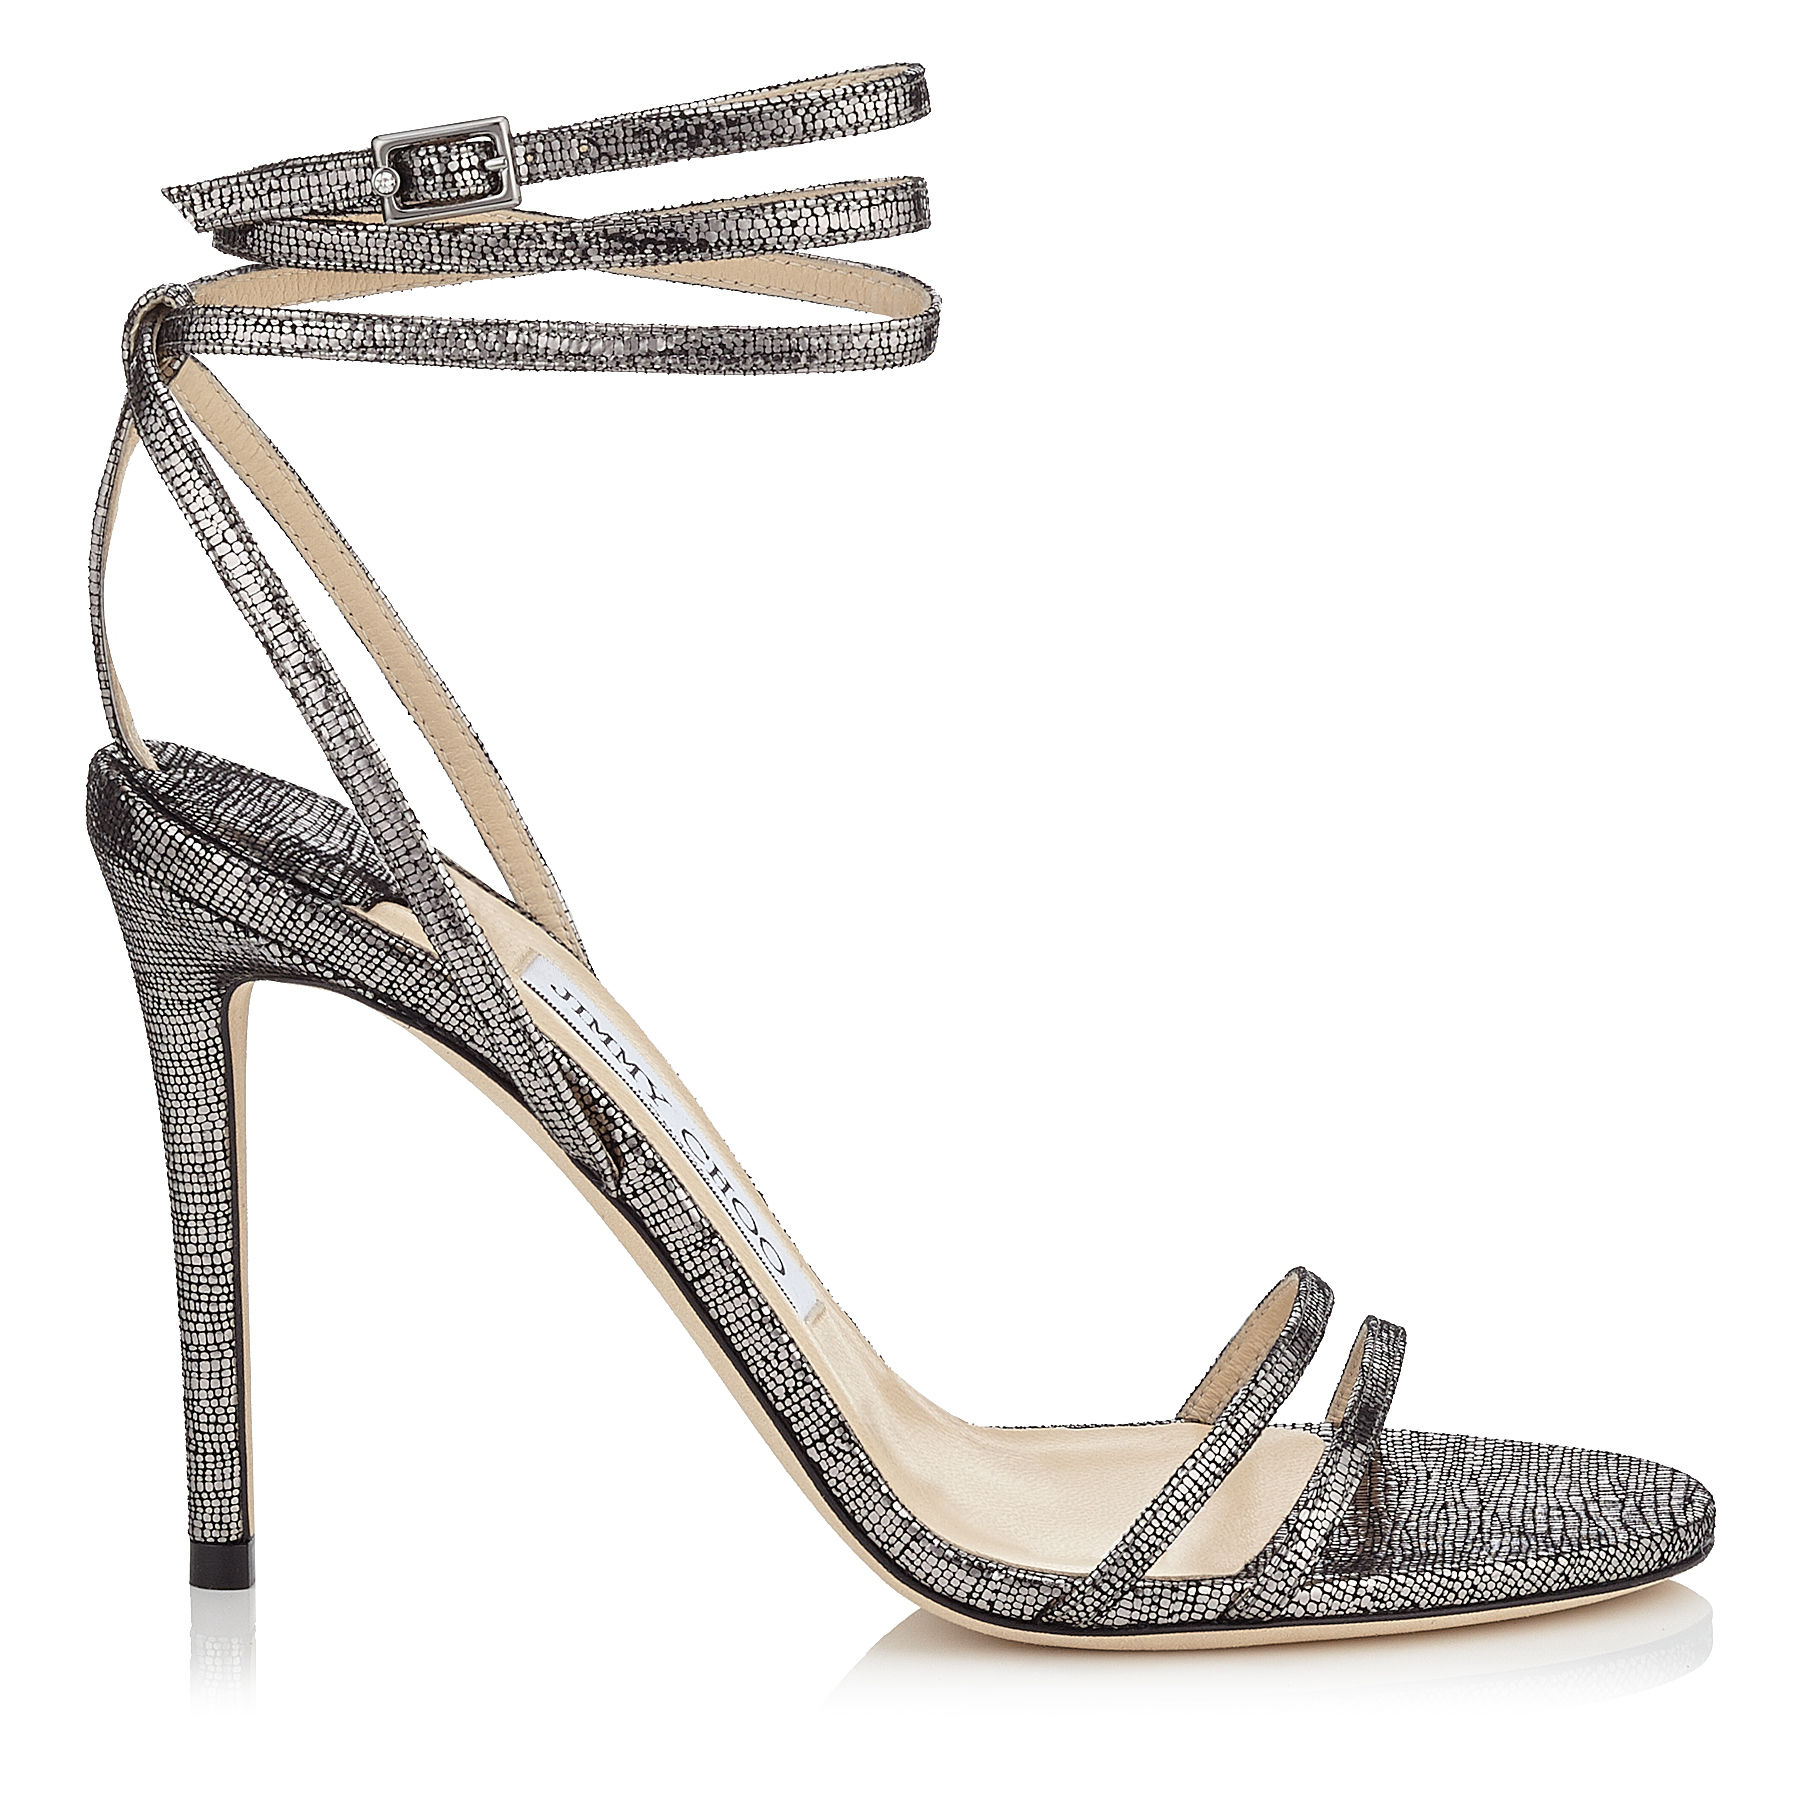 Memento collection by Jimmy Choo